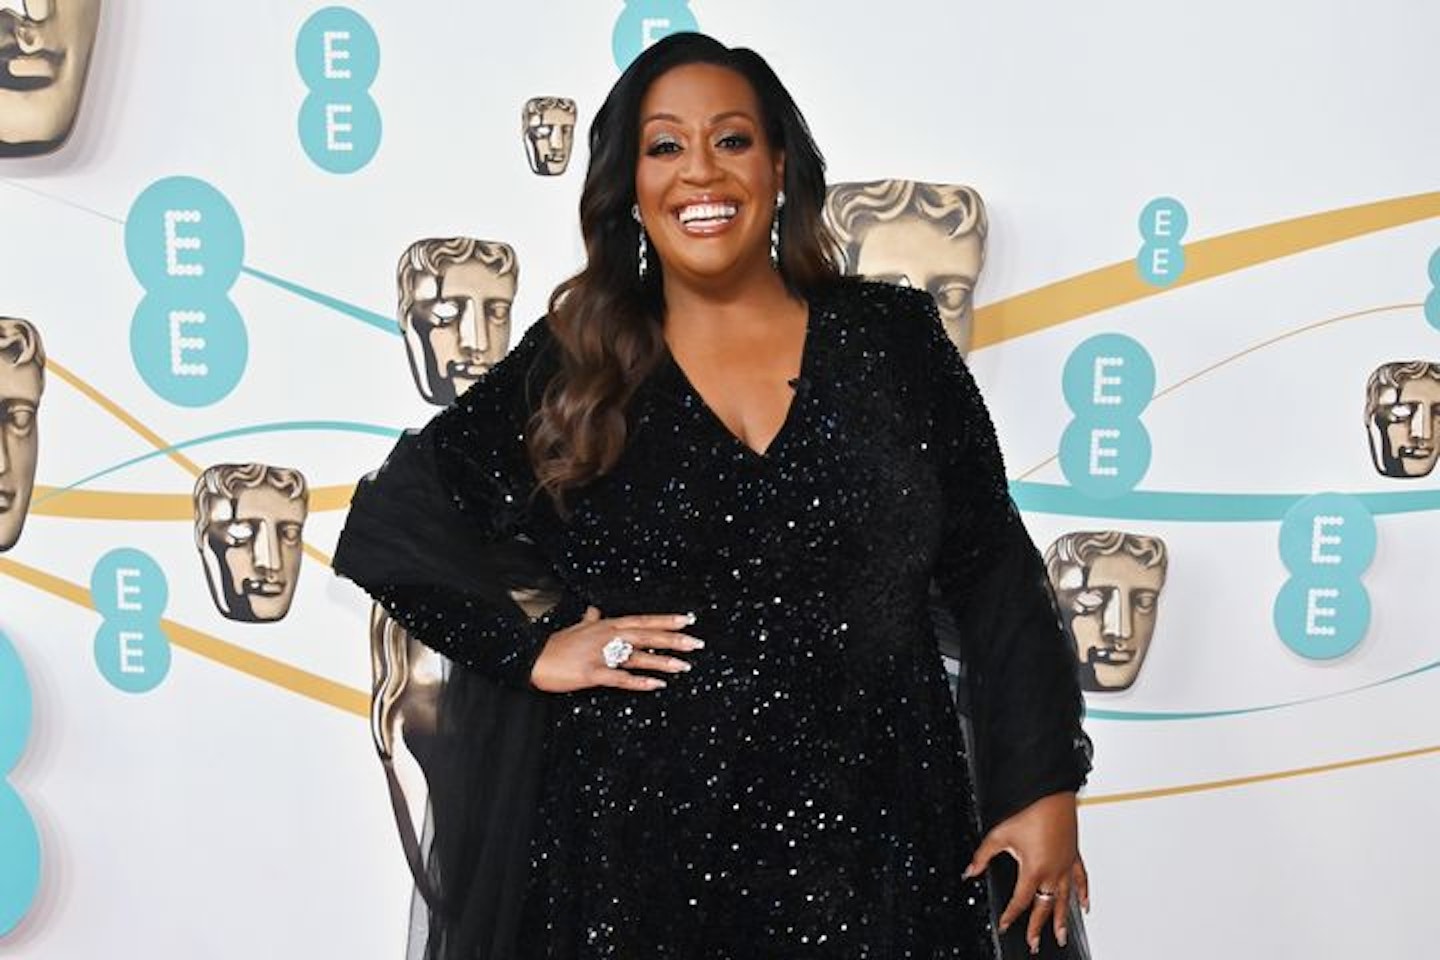 Alison Hammond co-hosted the 2023 BAFTAs with Richard E Grant